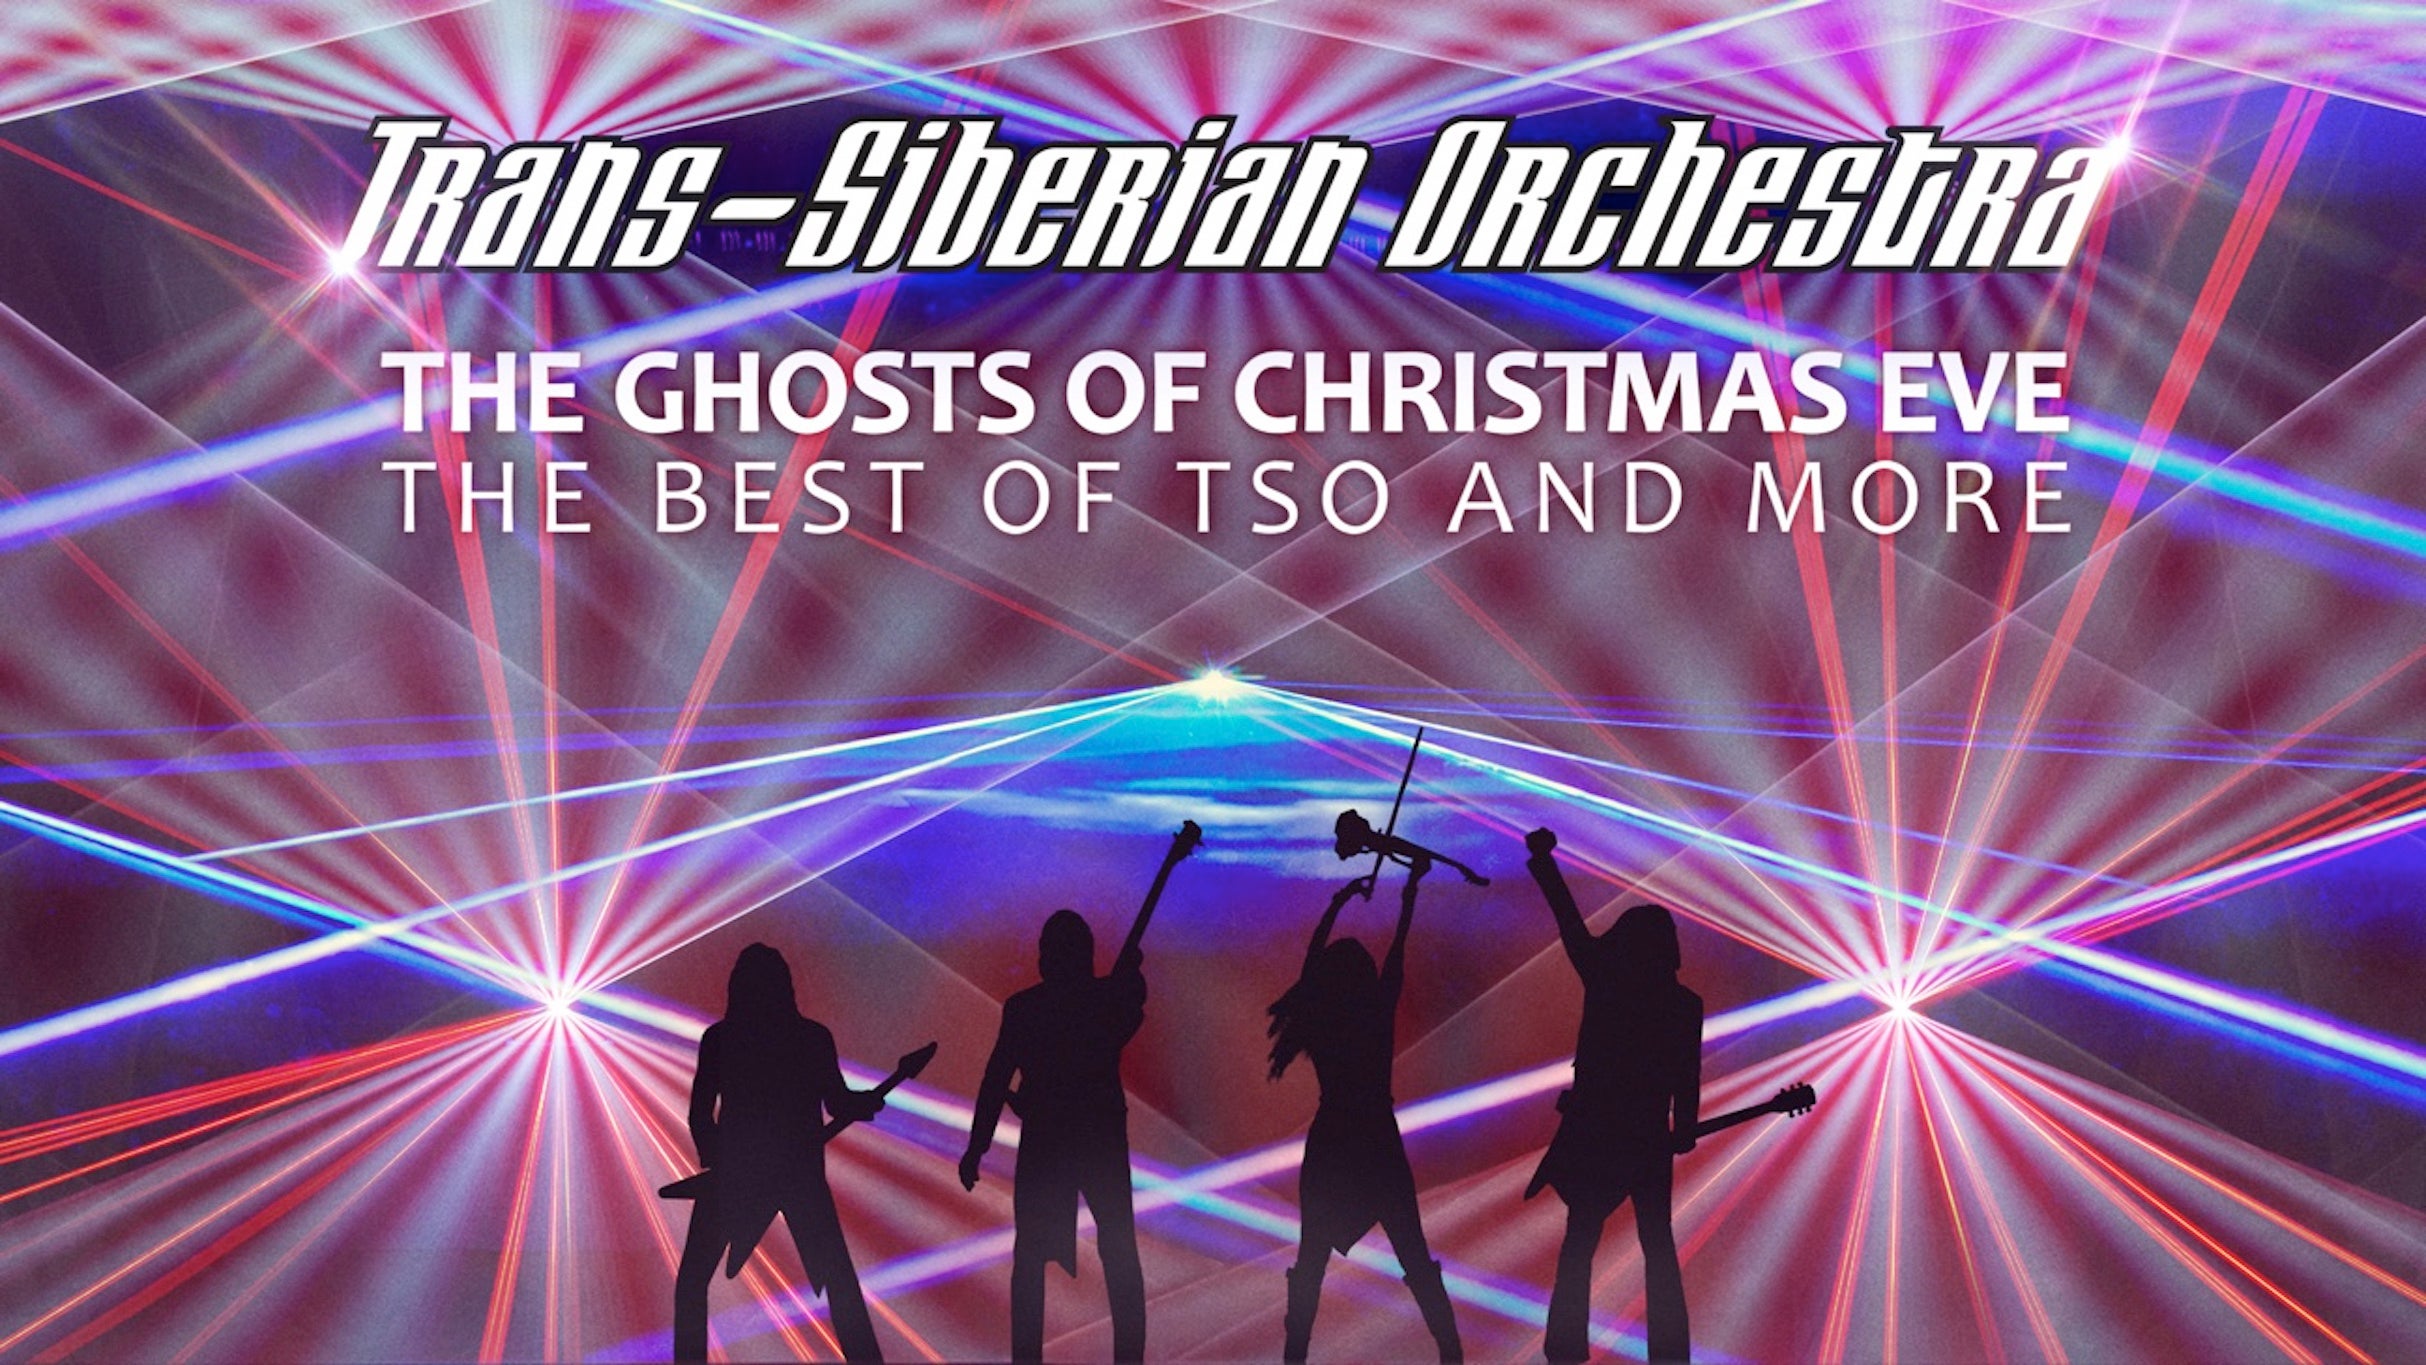 Trans-Siberian Orchestra - The Ghosts Of Christmas Eve presale code for show tickets in Uncasville, CT (Mohegan Sun Arena)